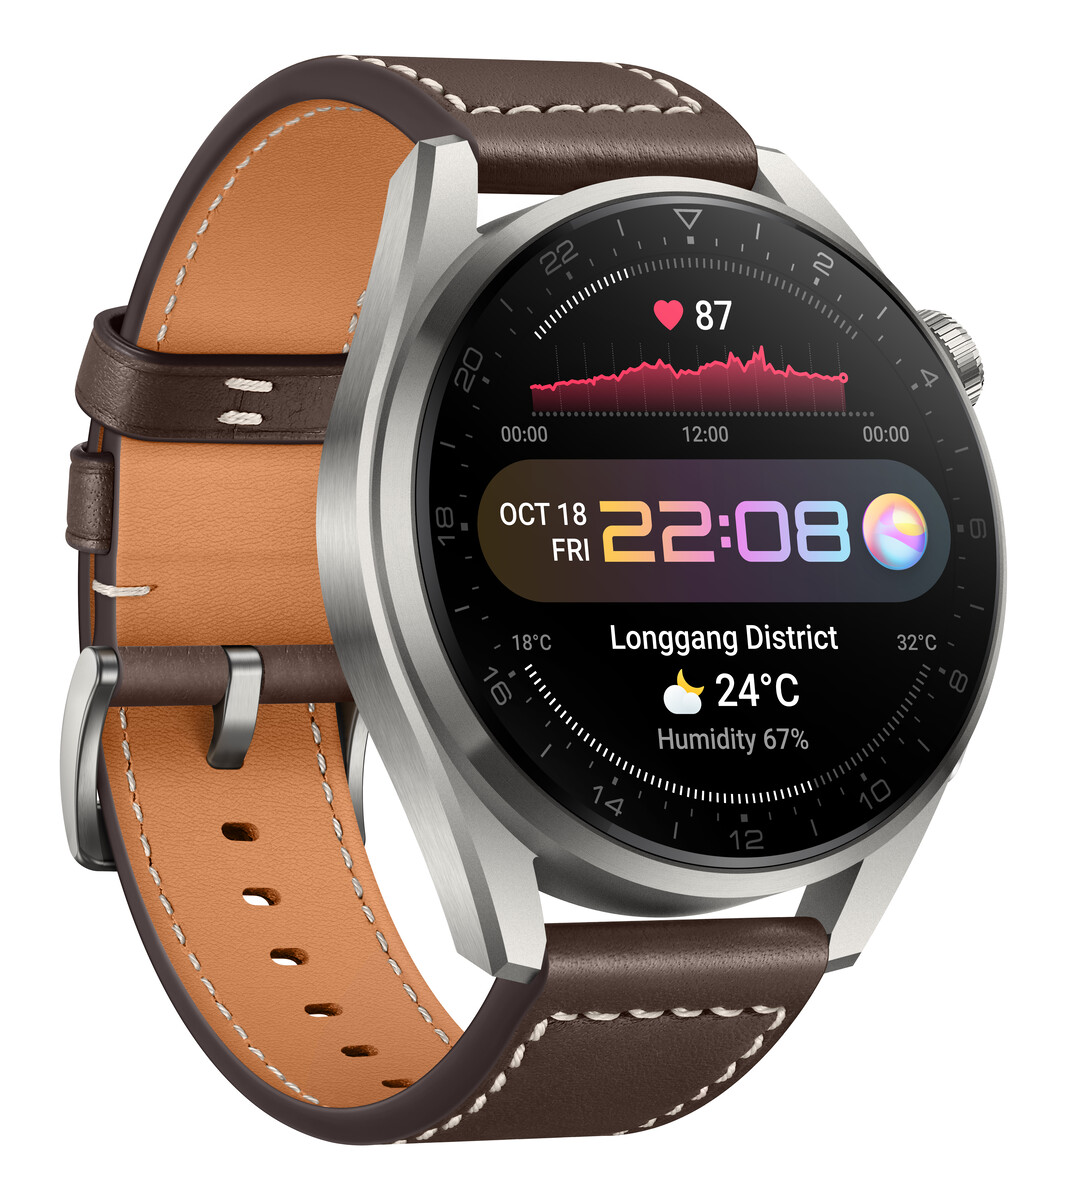 Huawei officially unveils the Watch 3 and 3 Pro new 4G/LTEenabled